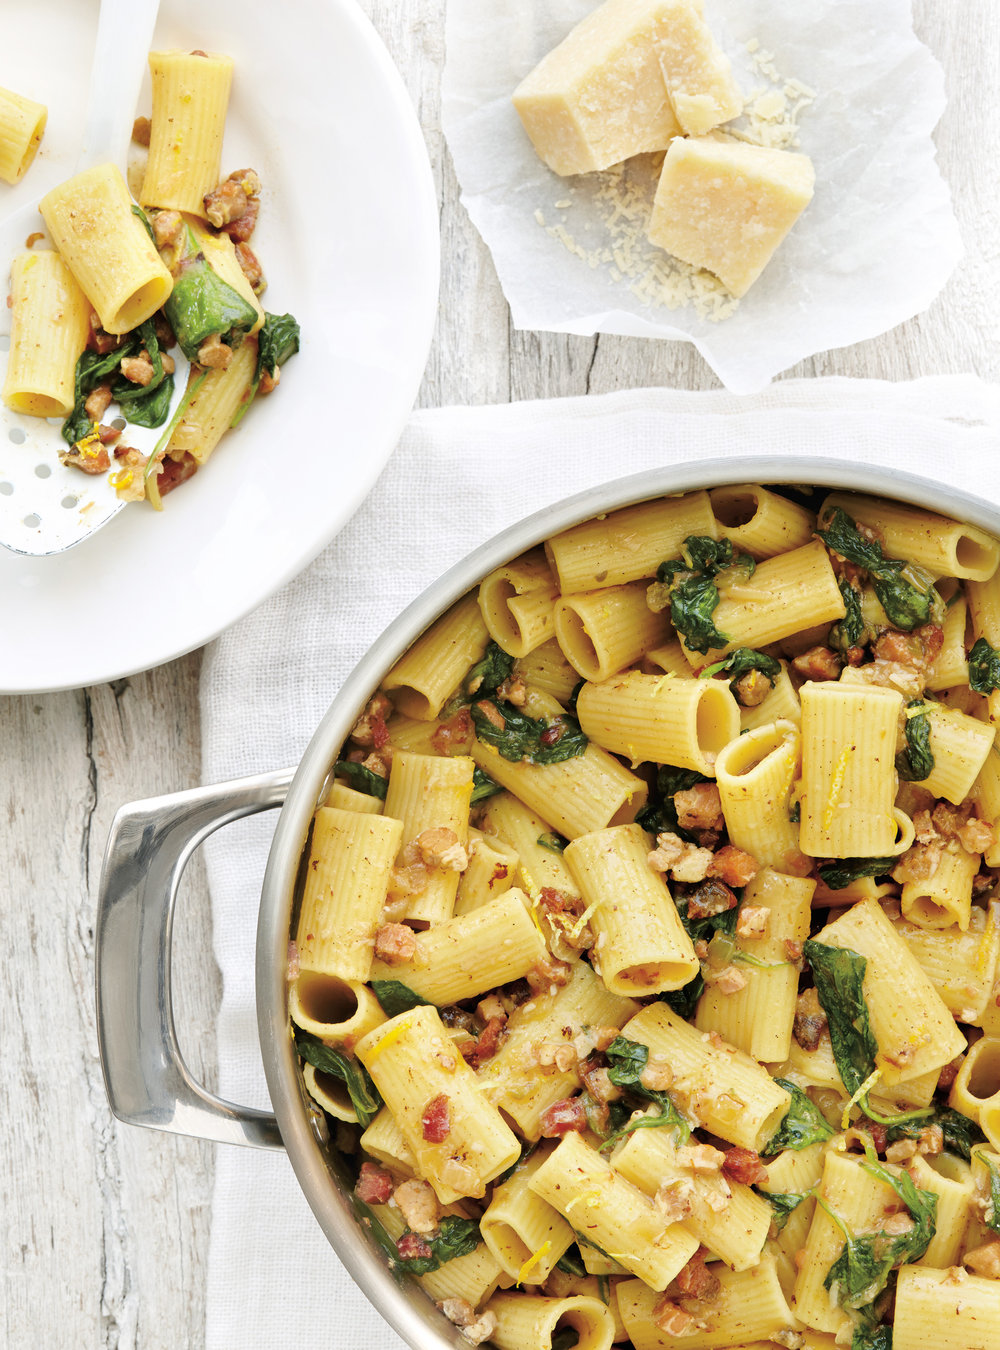 Rigatoni with Pork, Lemon and Spinach